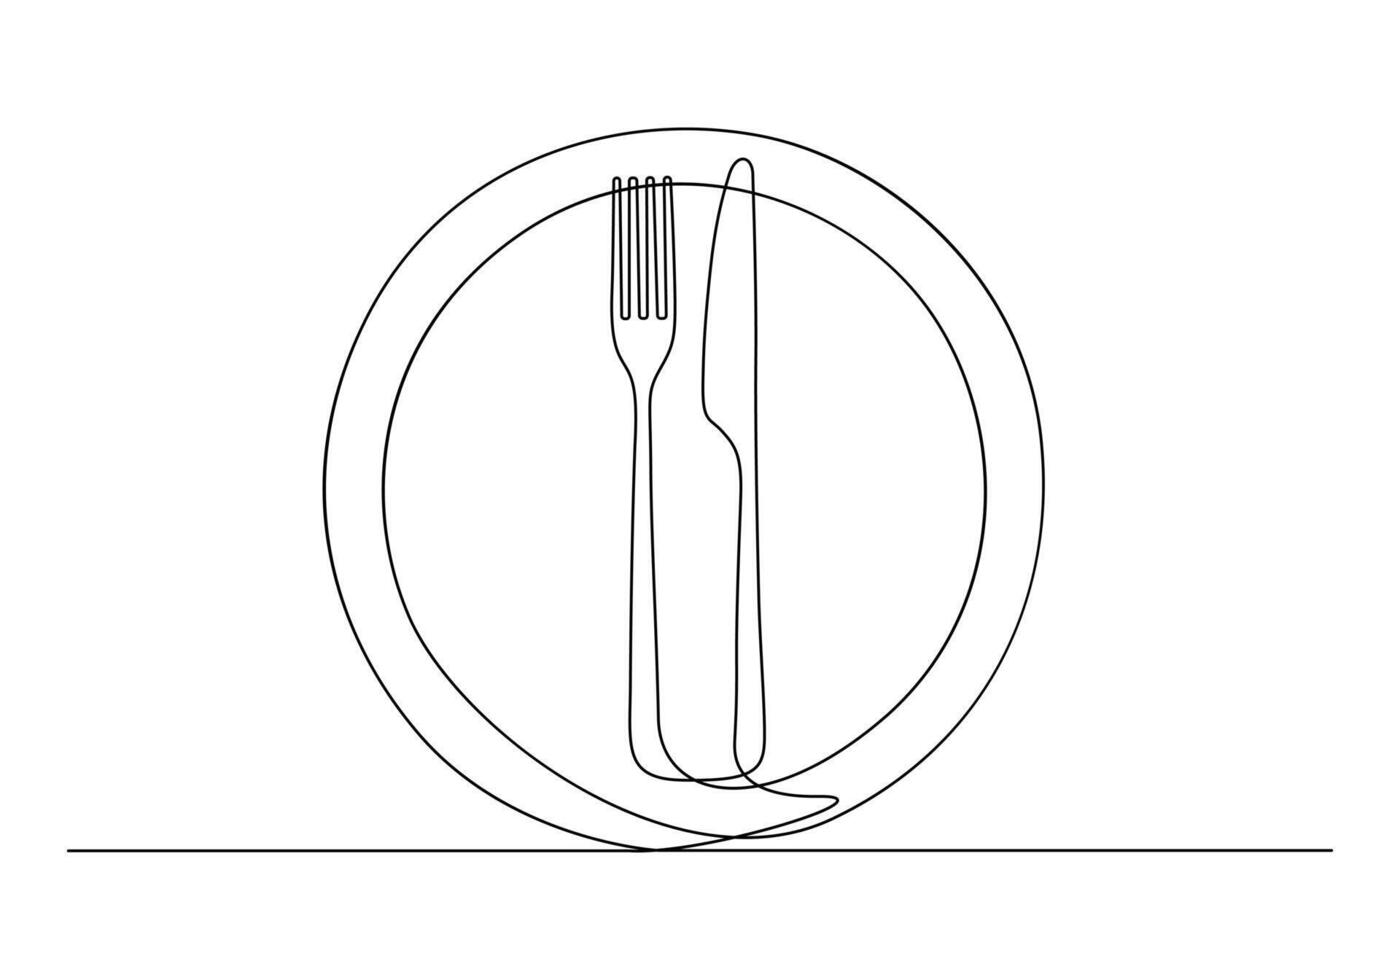 Continuous one line drawing of knife, fork and plate decoration for cafe or kitchen restaurant or menu cutlery vector illustration